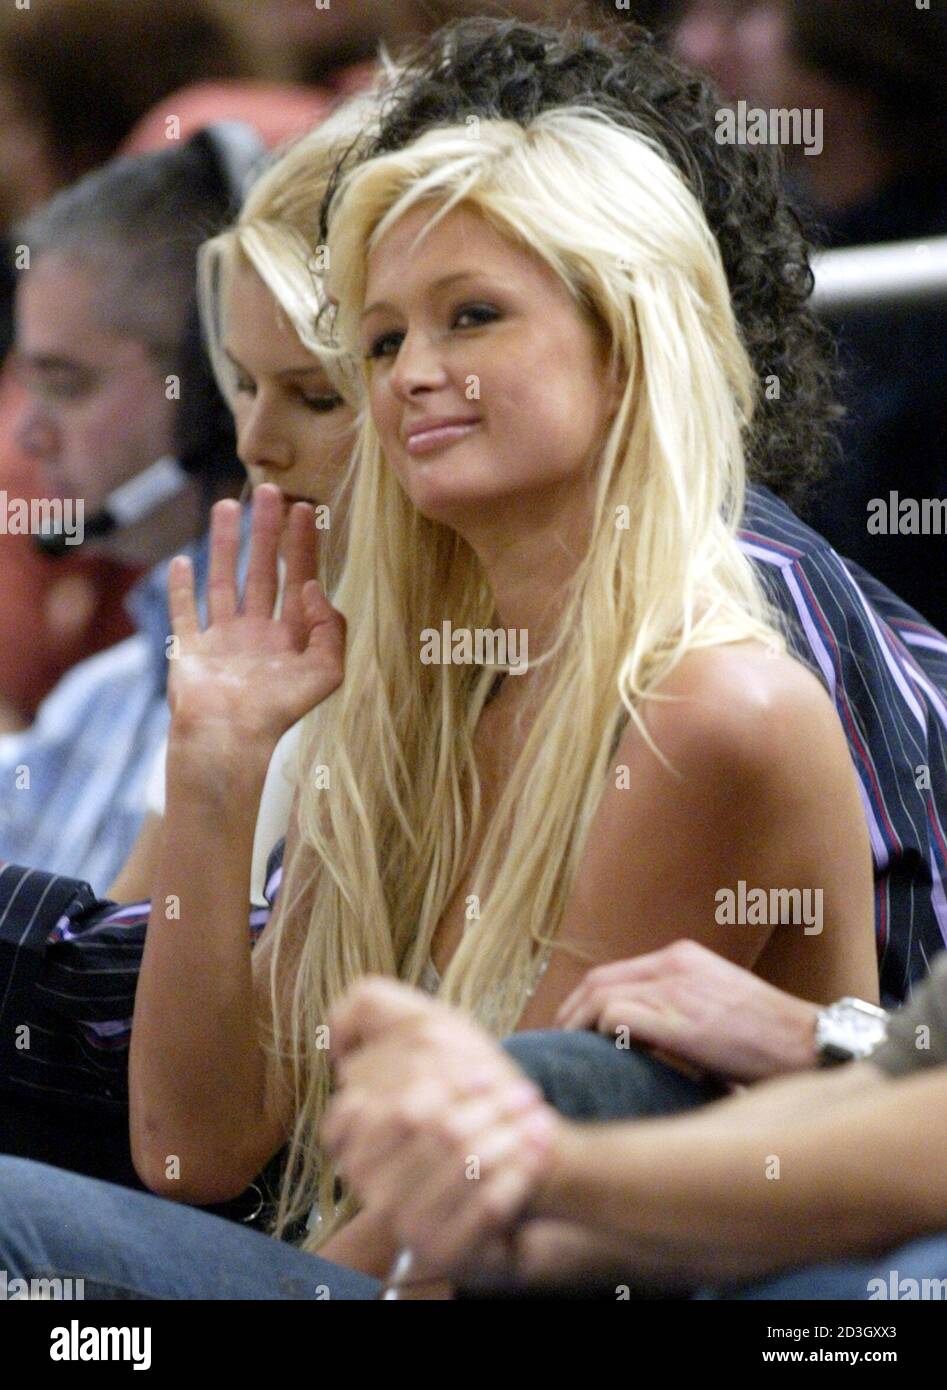 Celebrity personality Paris Hilton waves as she sits at courtside during the first half of the New York Knicks home opening NBA game against the Boston Celtics, in New York's Madison Square Garden, November 6, 2004. REUTERS/Ray Stubblebine  RFS Stock Photo